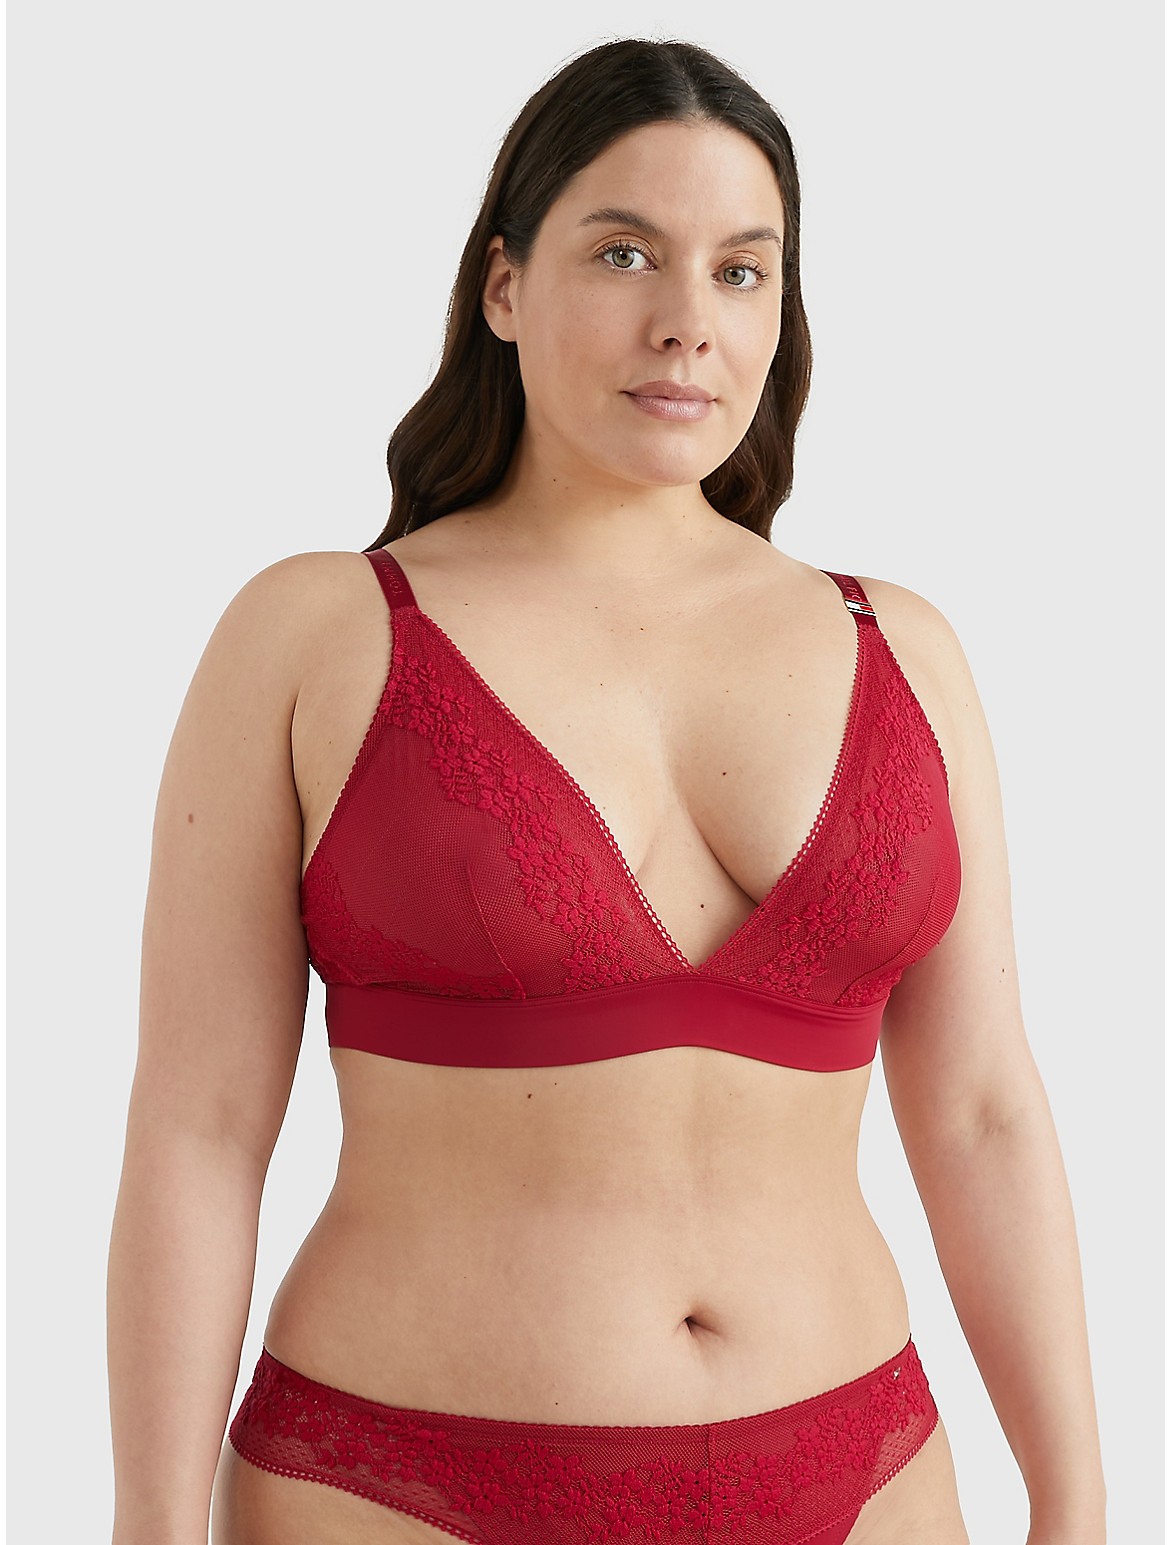 Tommy Hilfiger Women's Curve Floral Unlined Triangle Bra - Red - XL